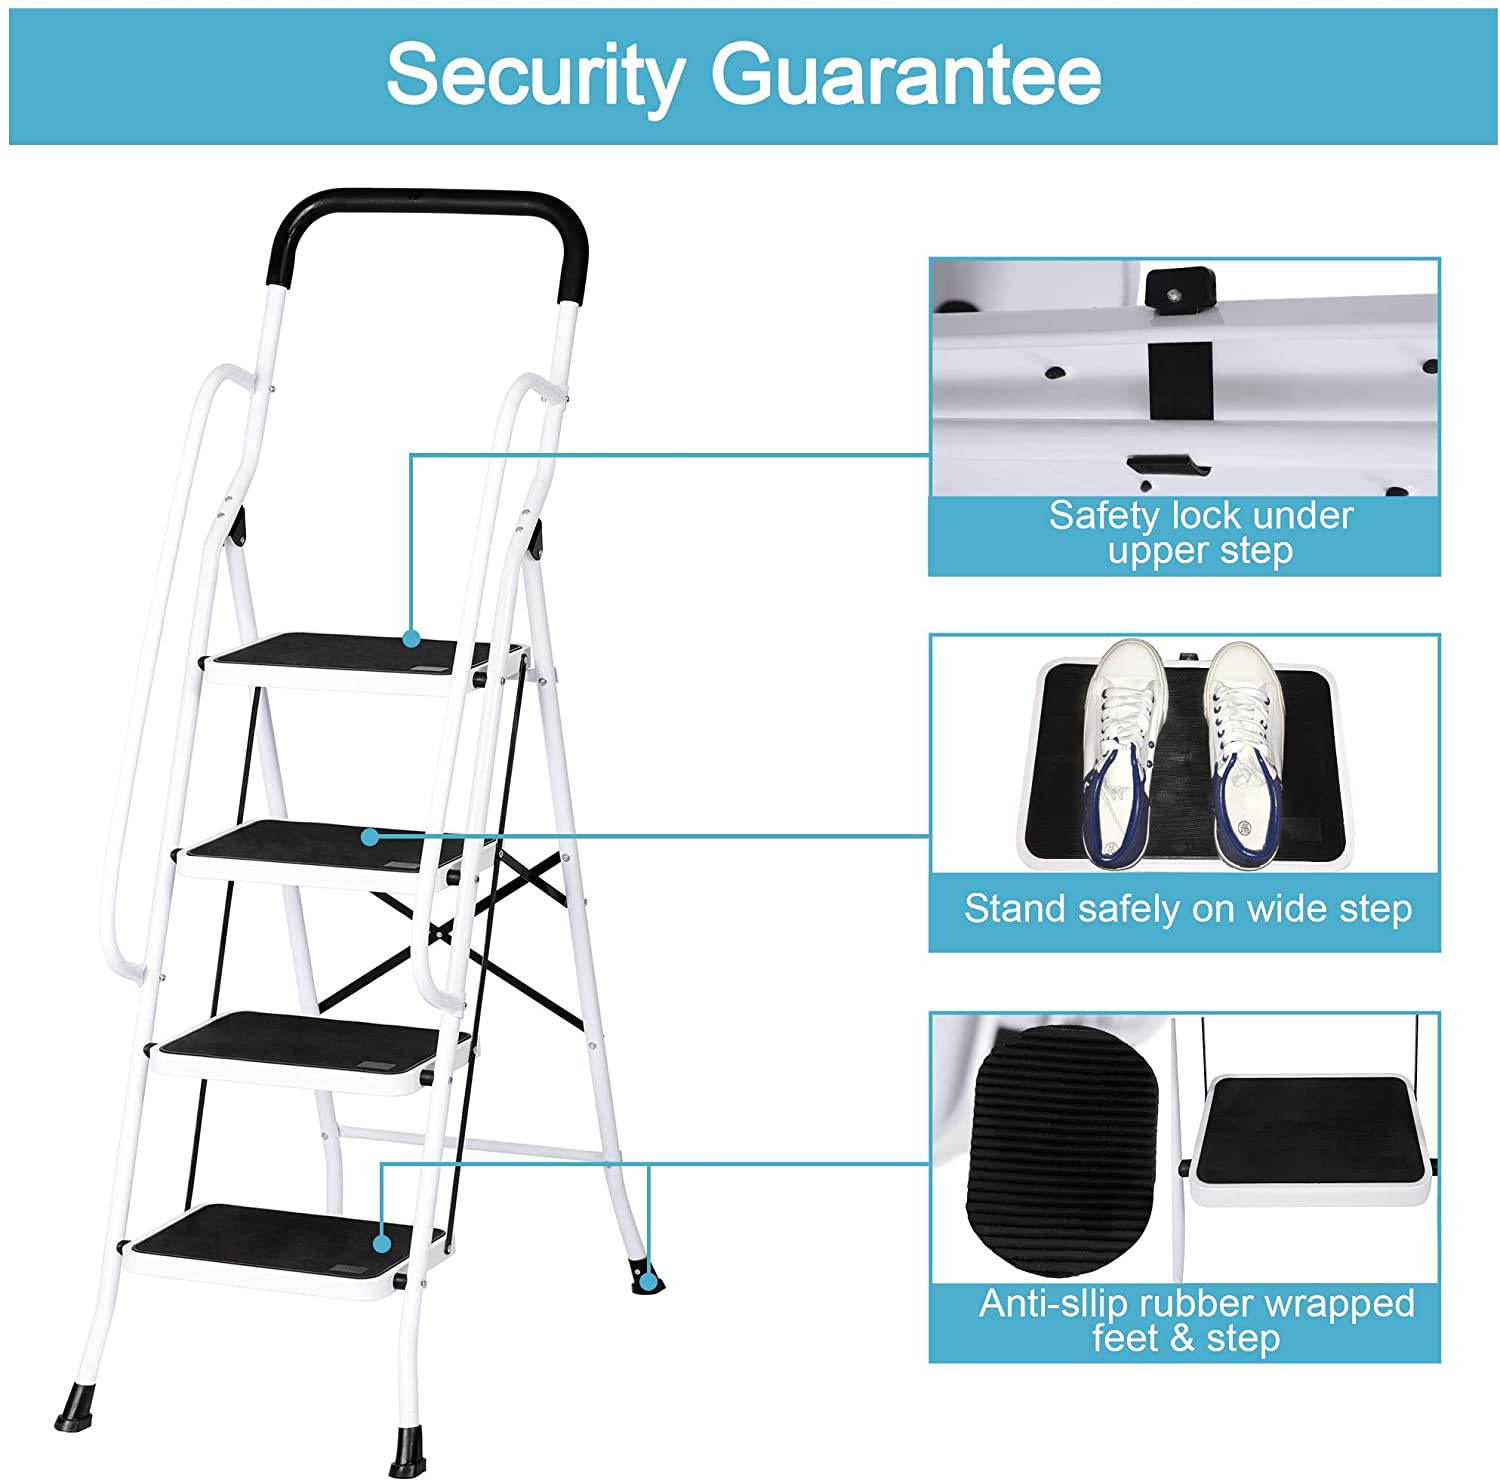 LUCKYERMORE 4 Step Stable Step Ladders with Hand Grips Safety Ladders 330lbs Capacity